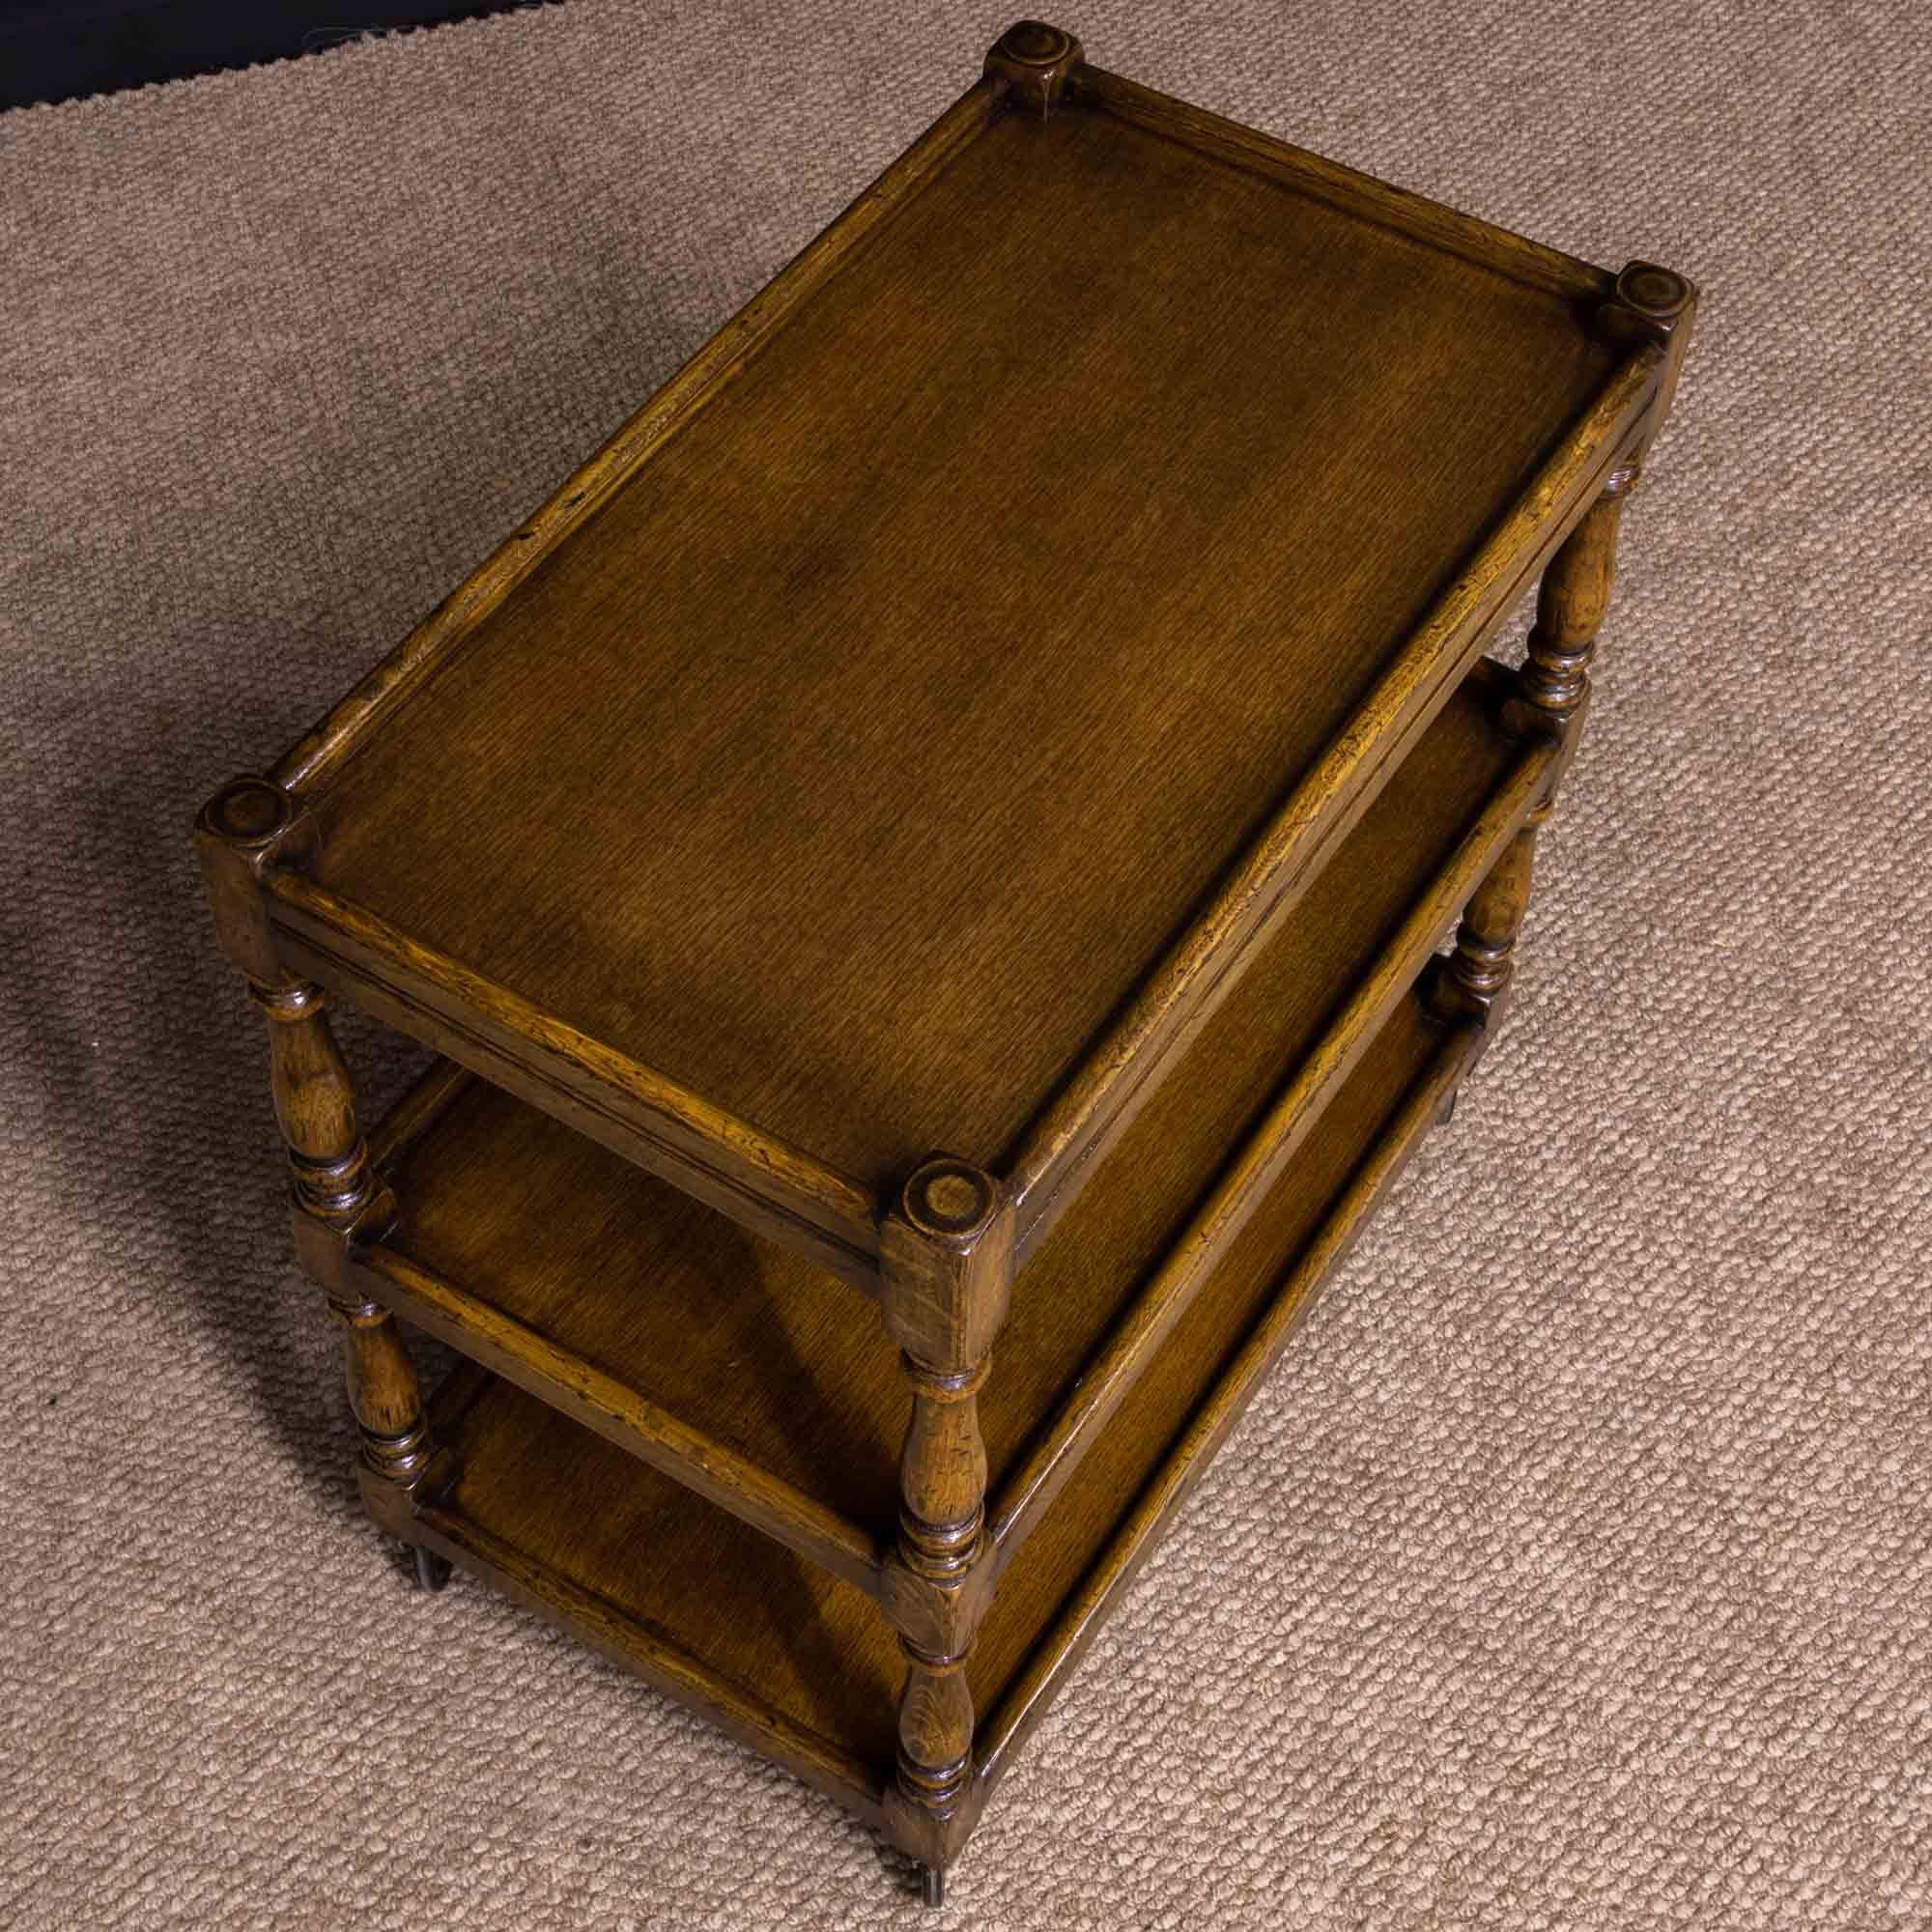 An excellent quality oak tea trolley with a slightly distressed finish similar to that of the well known Ipswich firm Titchmarsh and Goodwin. The original brass wheels are all in good working order and running smoothly.